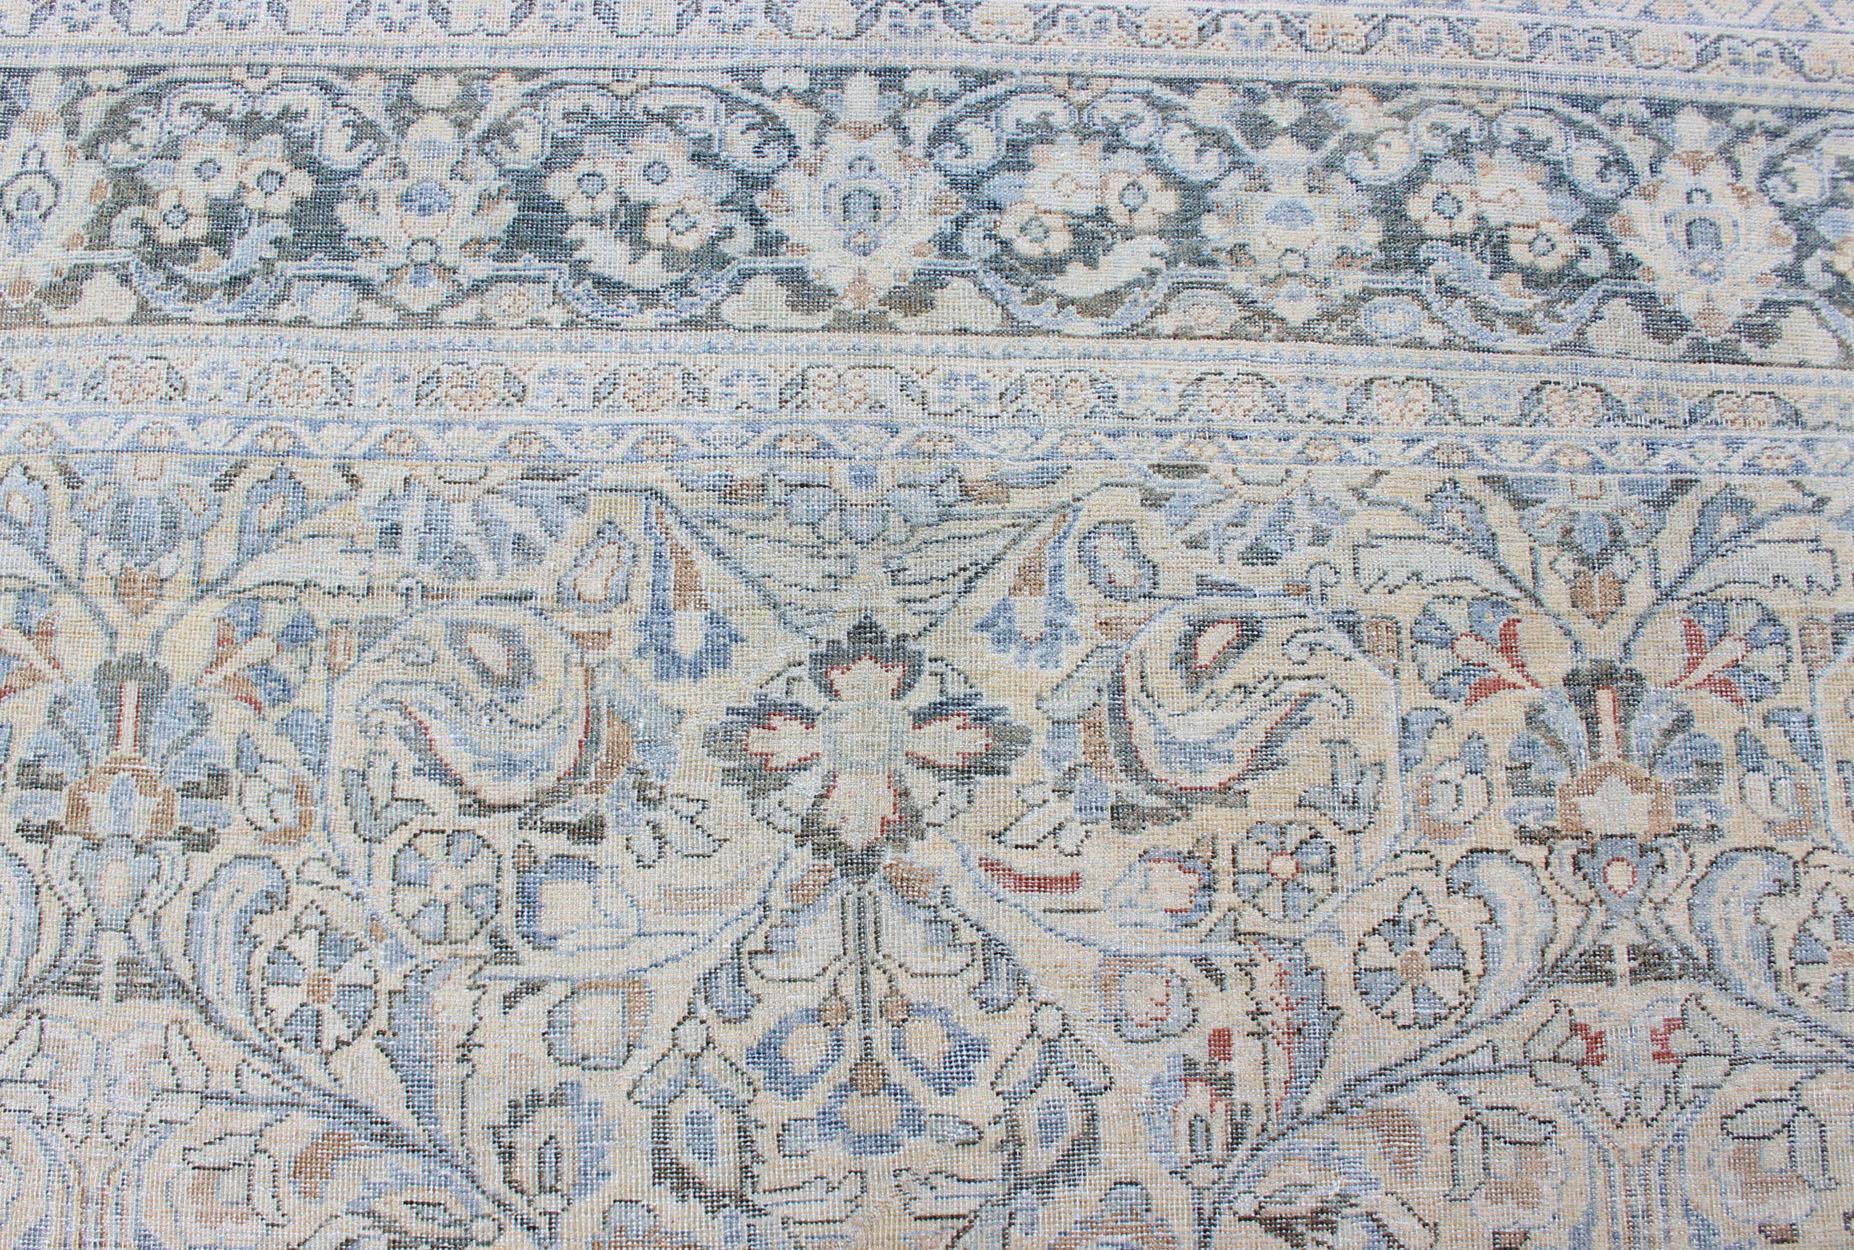 Antique Persian Mahal Rug with Sub Floral Design in Blue, Charcoal & Cream 6